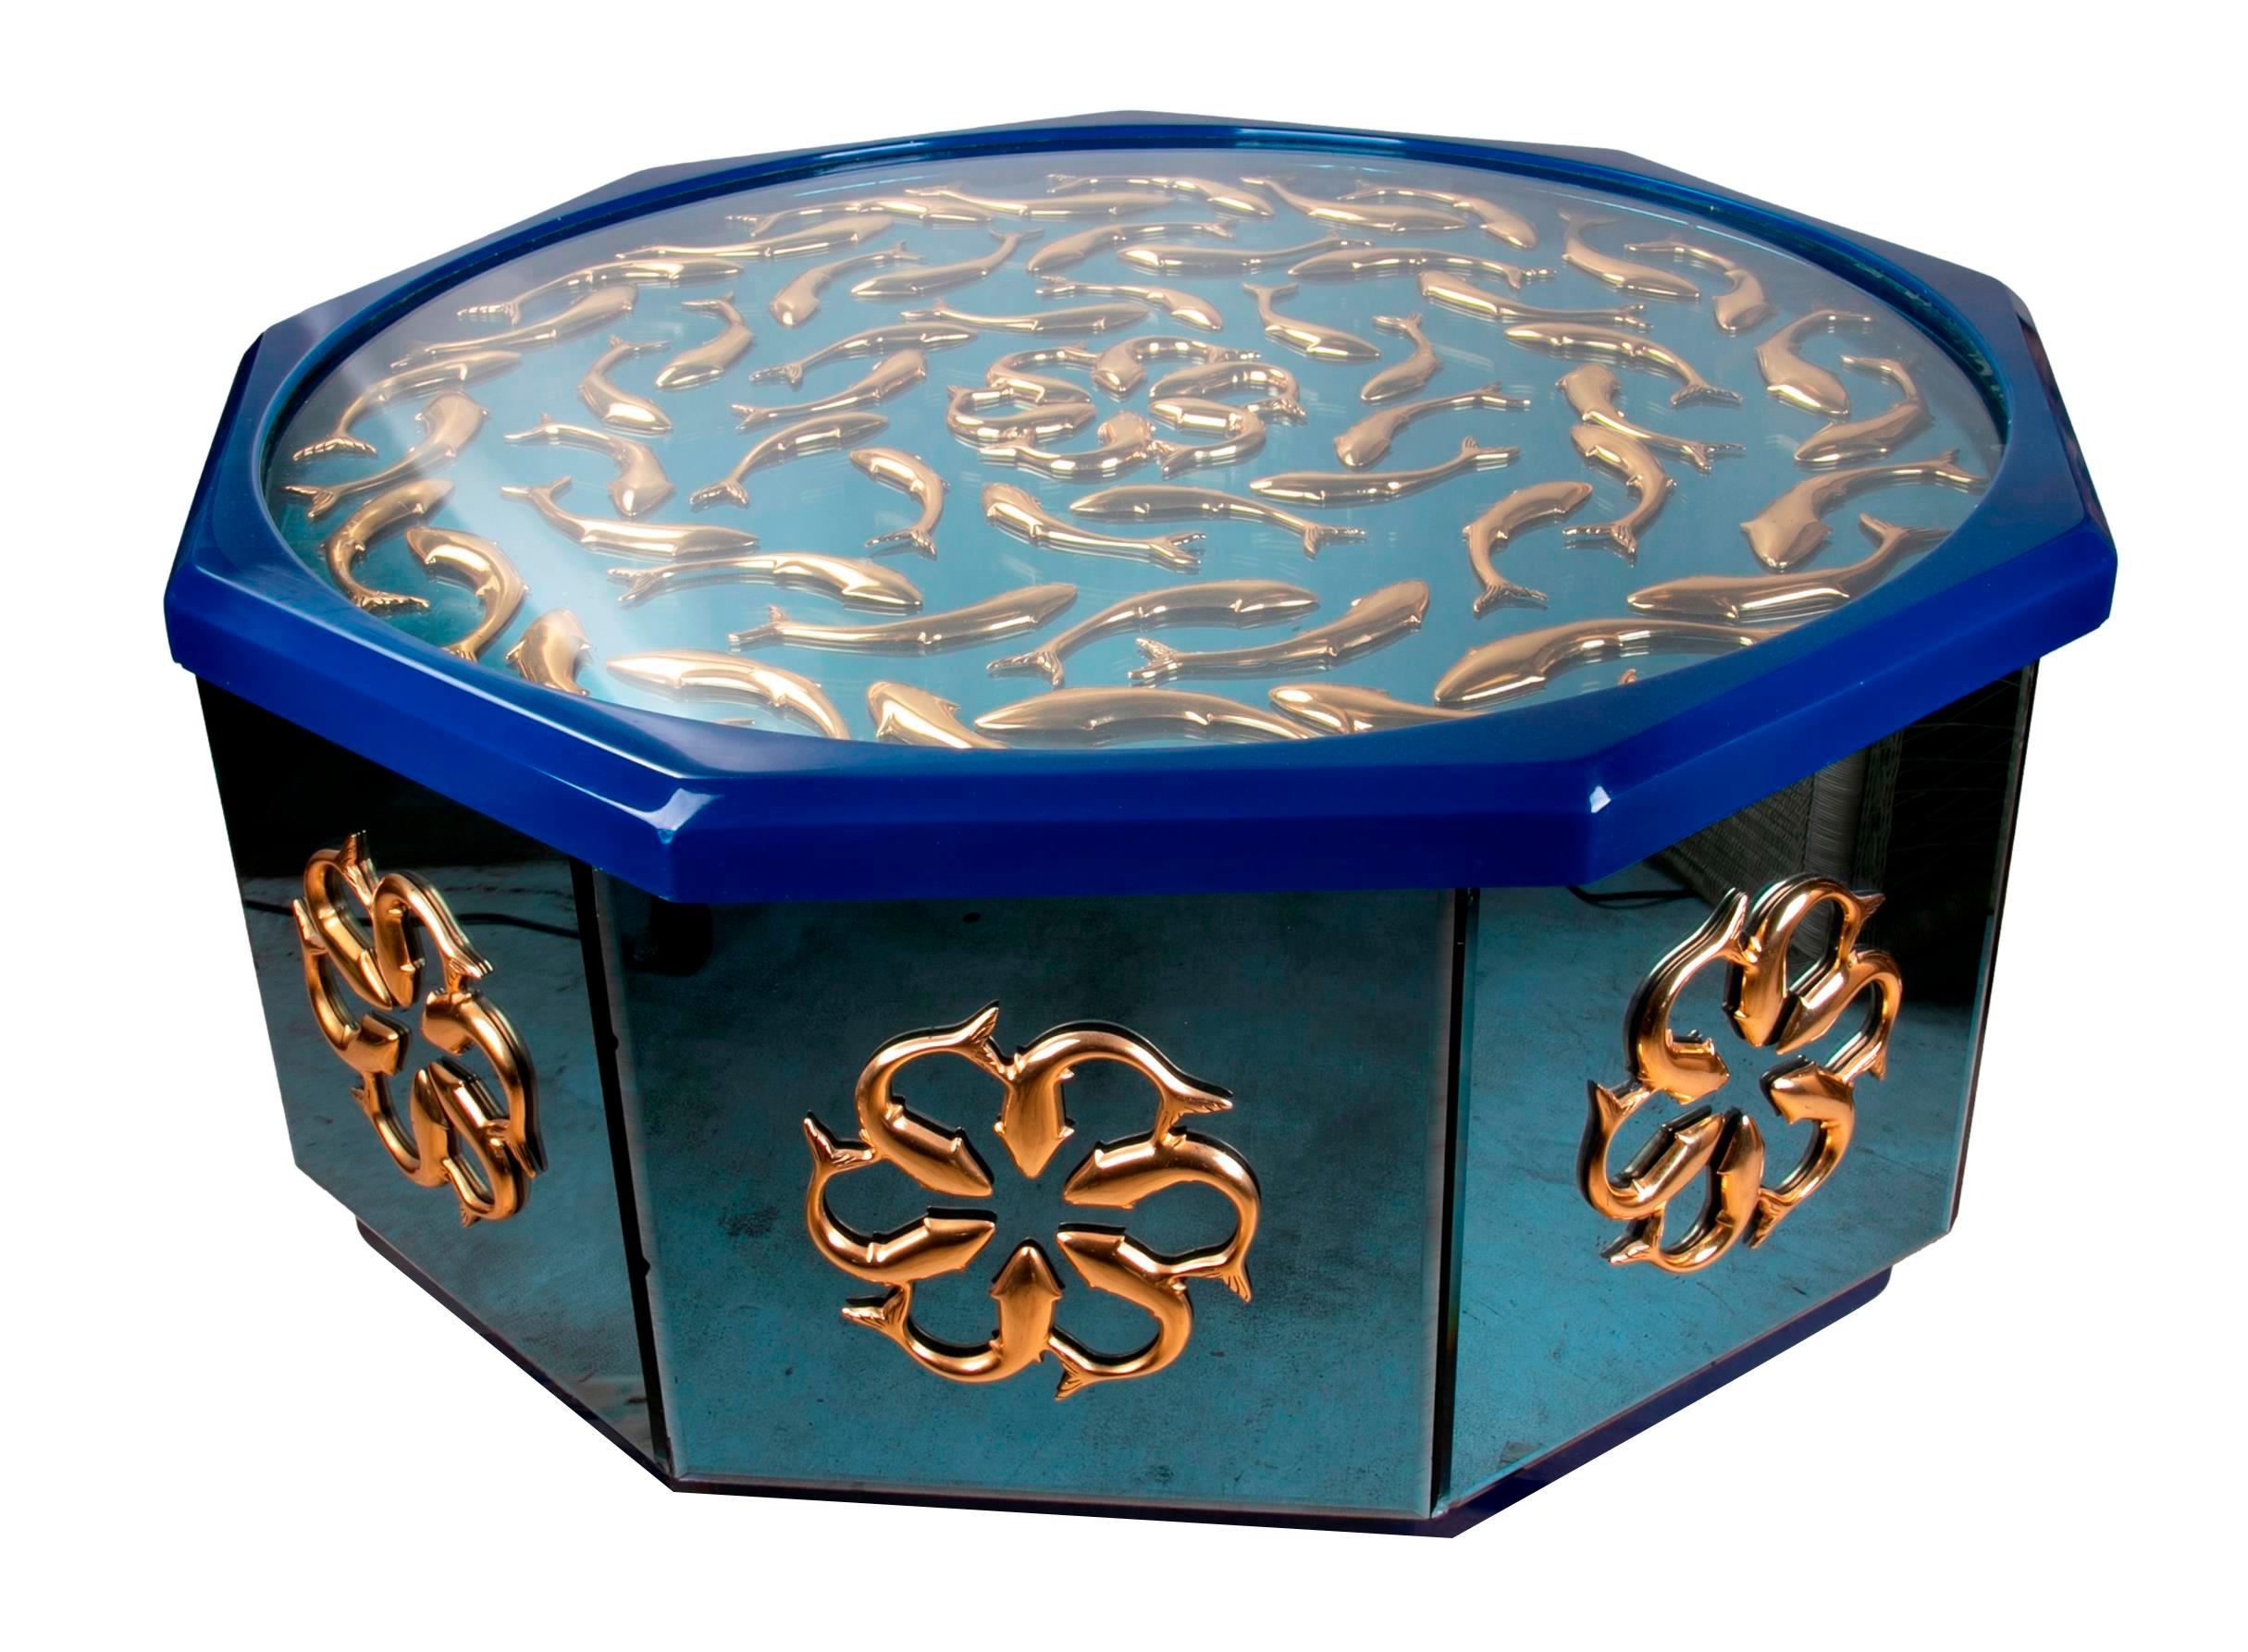 Octagonal brass table with glass, fish decoration and glass top.